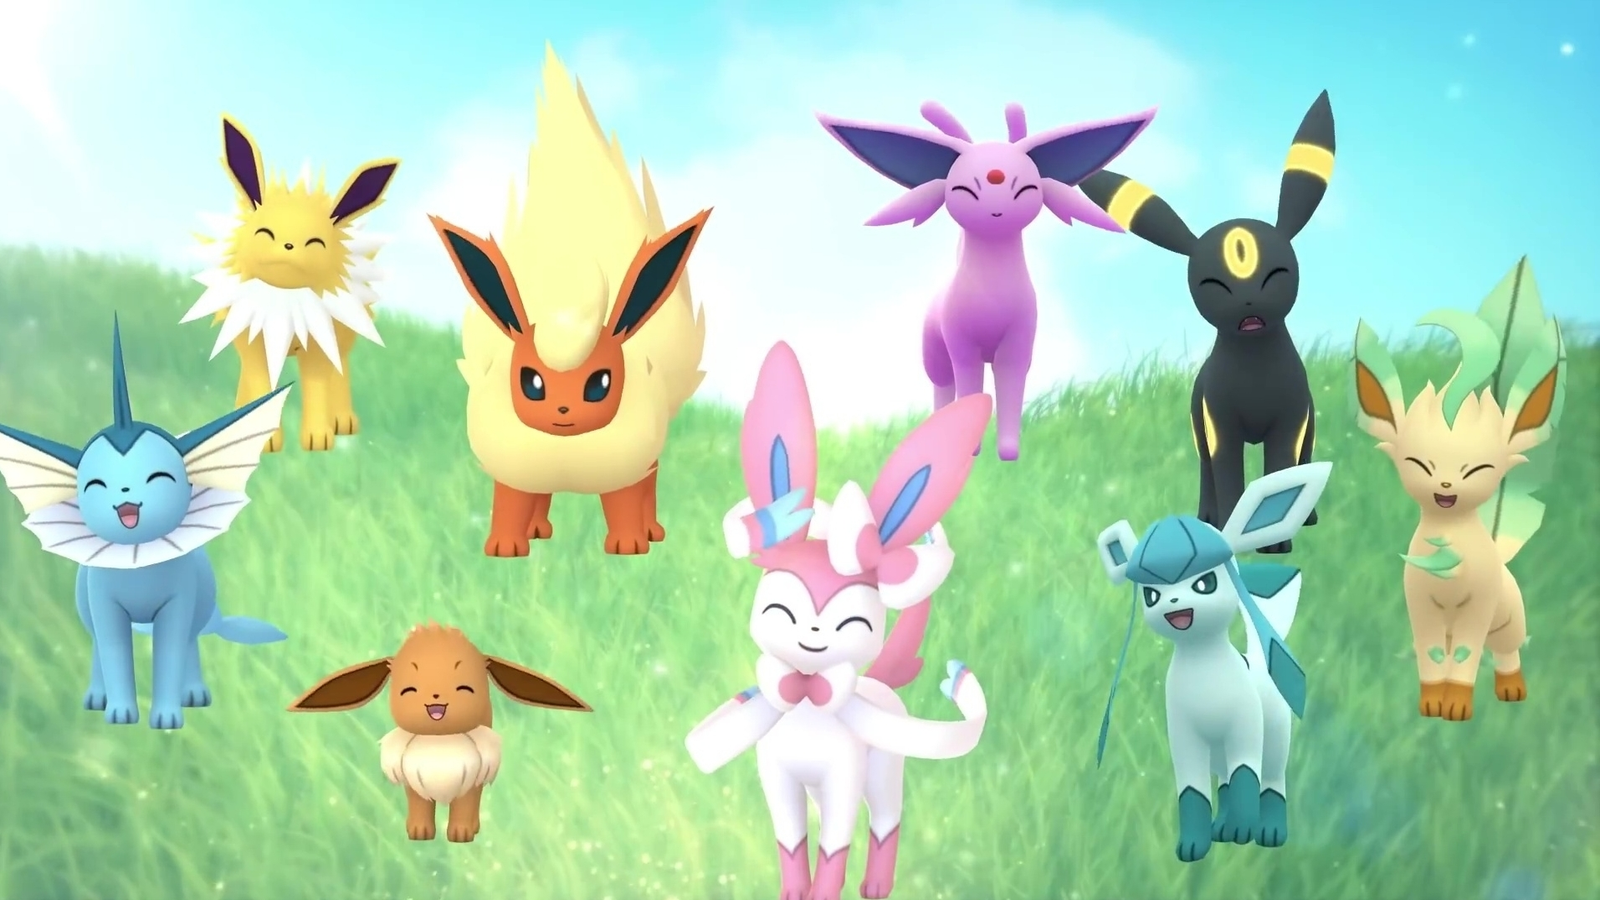 Pokemon Evolutions Moves Forward with Episode 7: Watch